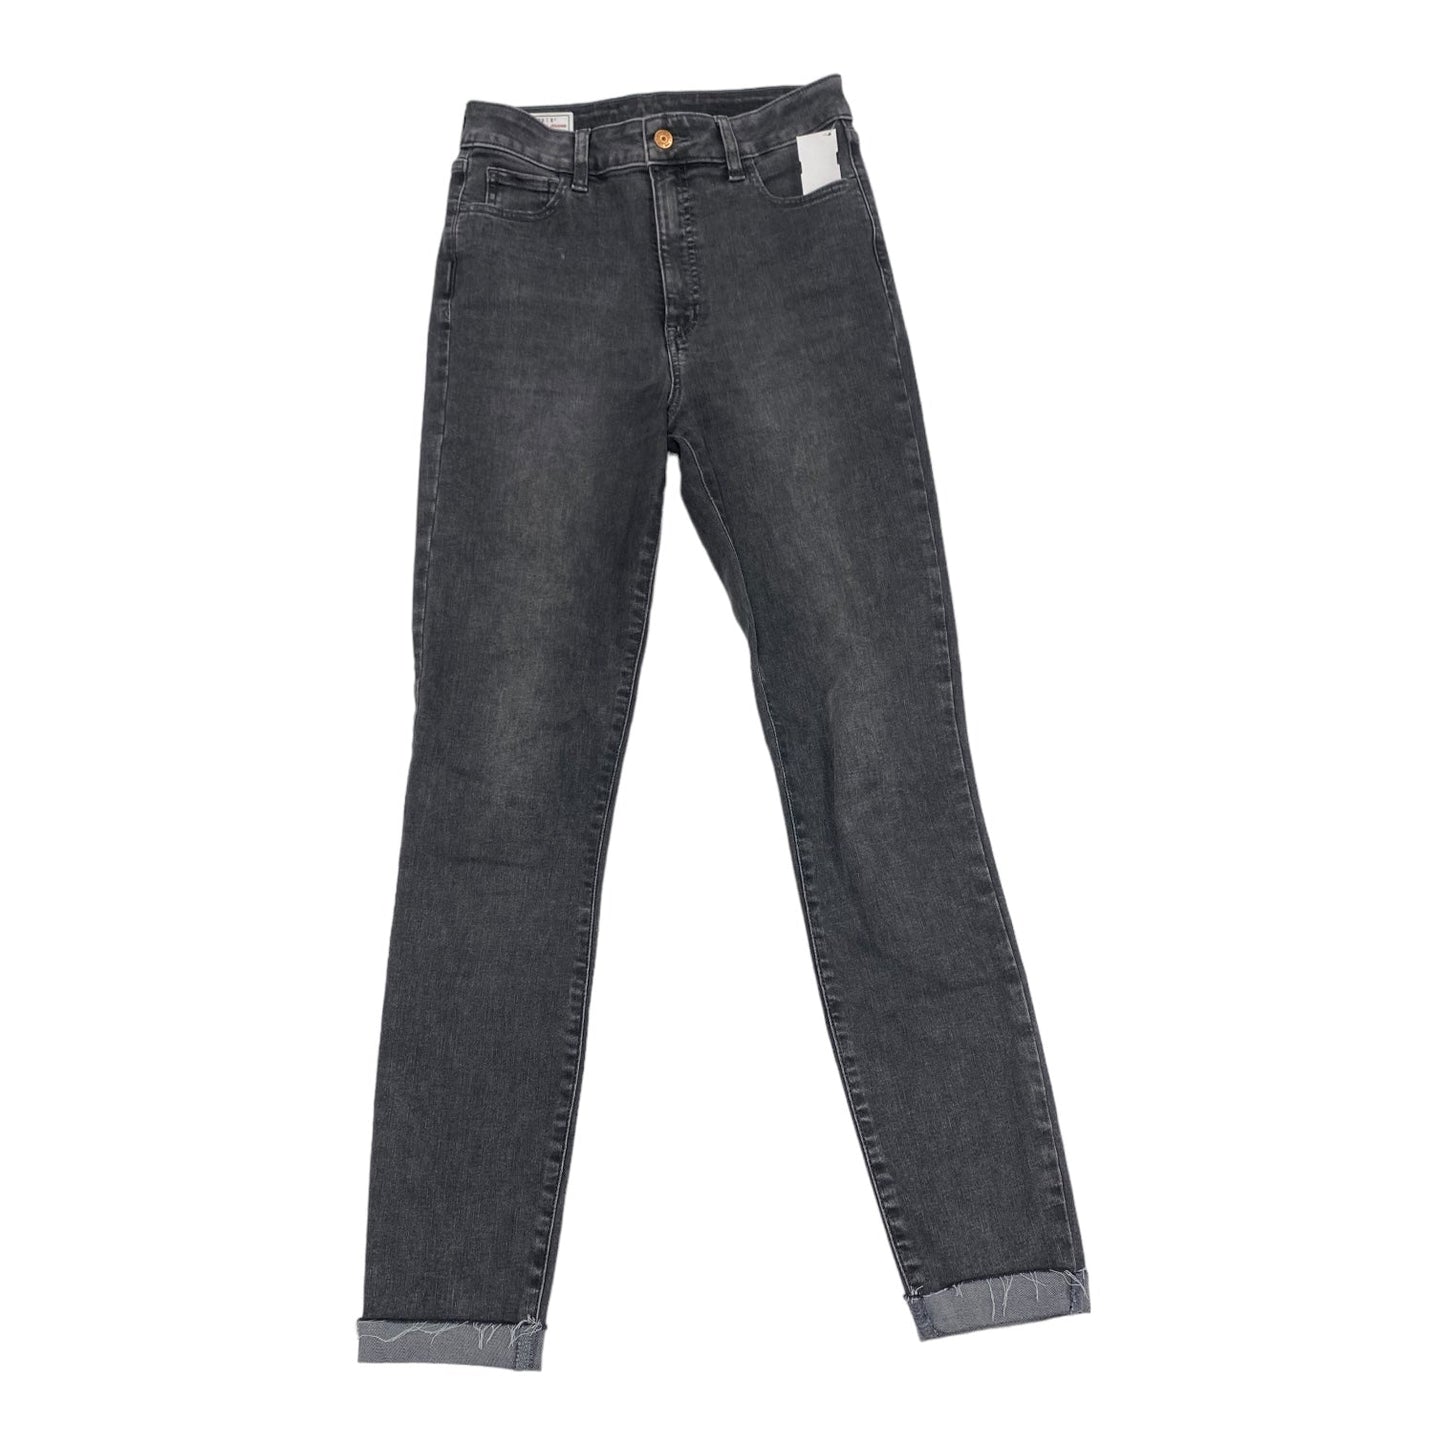 Jeans Skinny By Gap  Size: 8tall